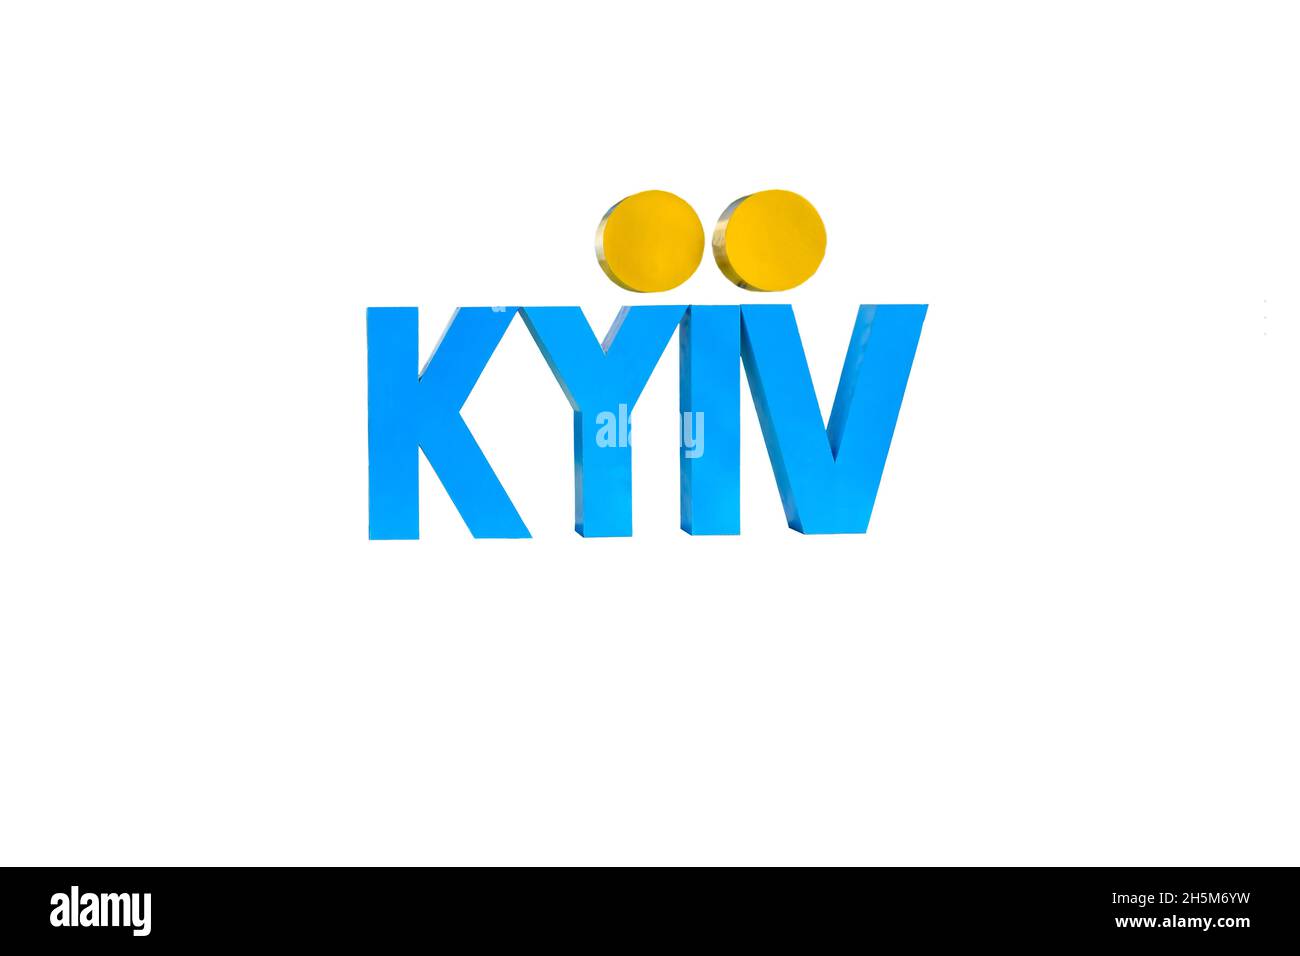 3D illustration (3D rendering) from the word KIEV, the capital of Ukraine, written in blue and yellow on an undercut on a white background in the cent Stock Photo